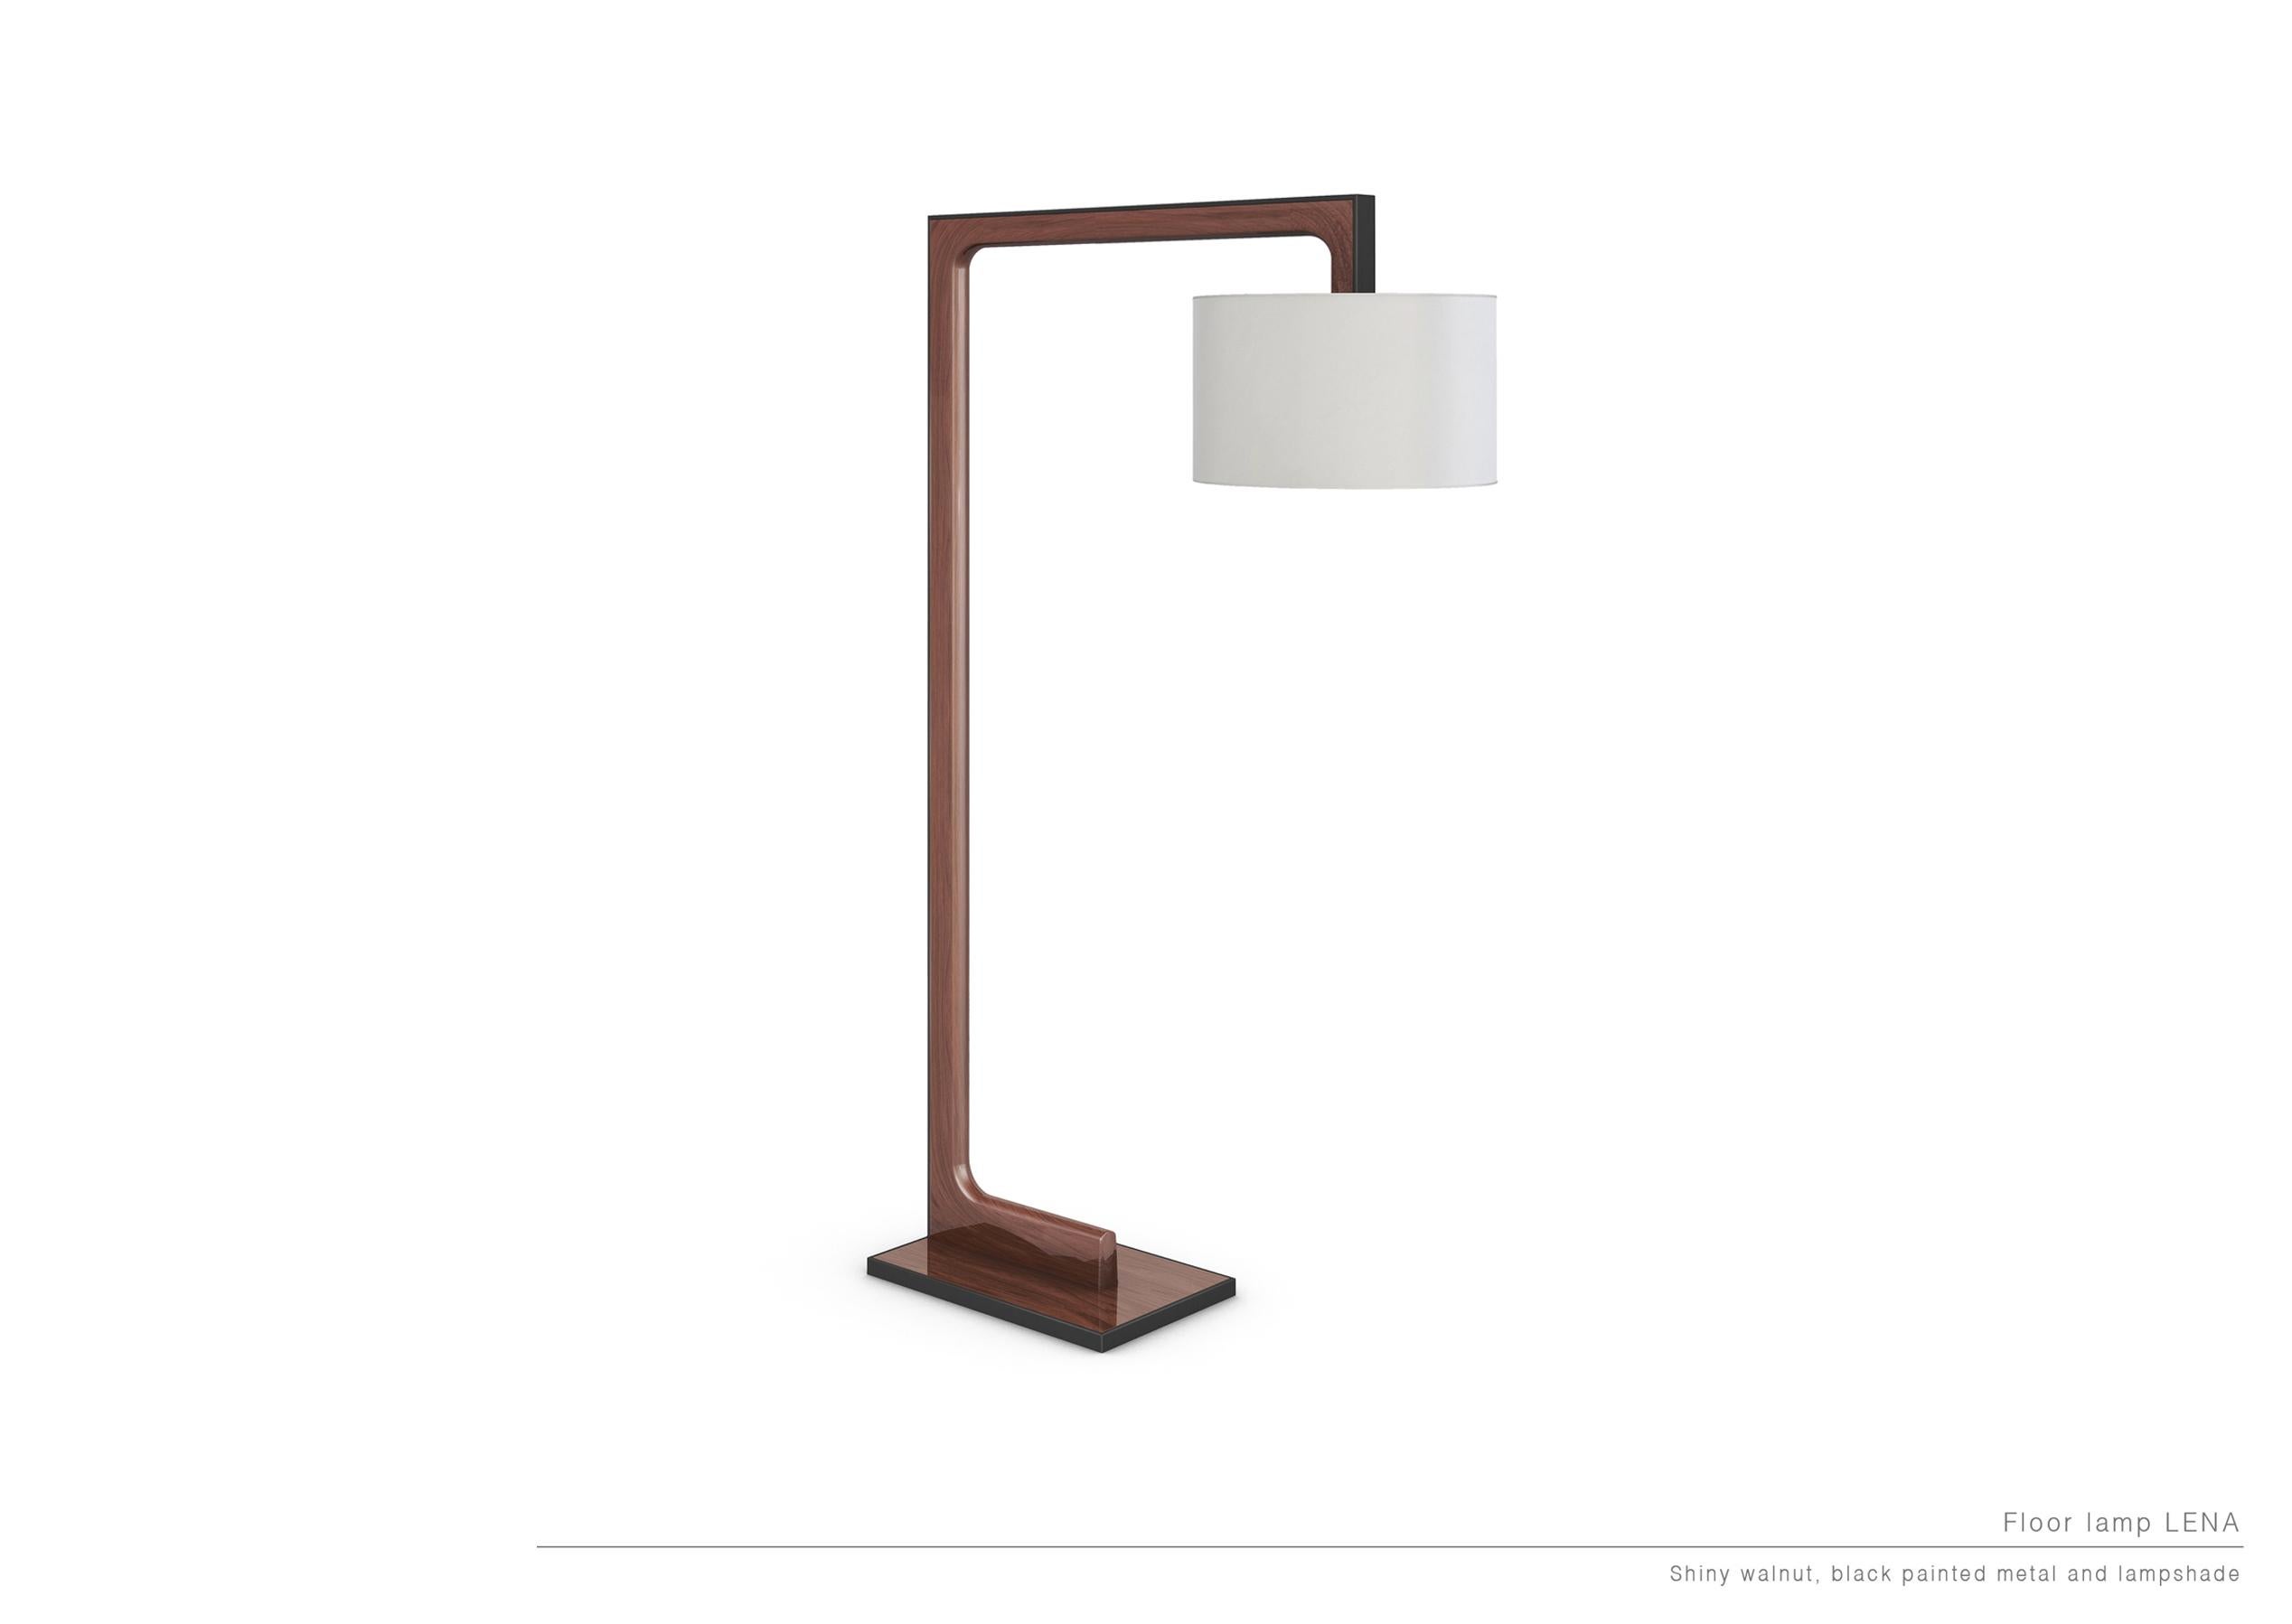 Lena floor lamp with paper shade by LK Edition.
Limited edition. 
Dimensions: 92.5 x 35 x H 183 cm 
Materials: Glossy varnished walnut, black metal. Paper shade. 
Also sold without paper shade.. 

It is with the sense of detail and